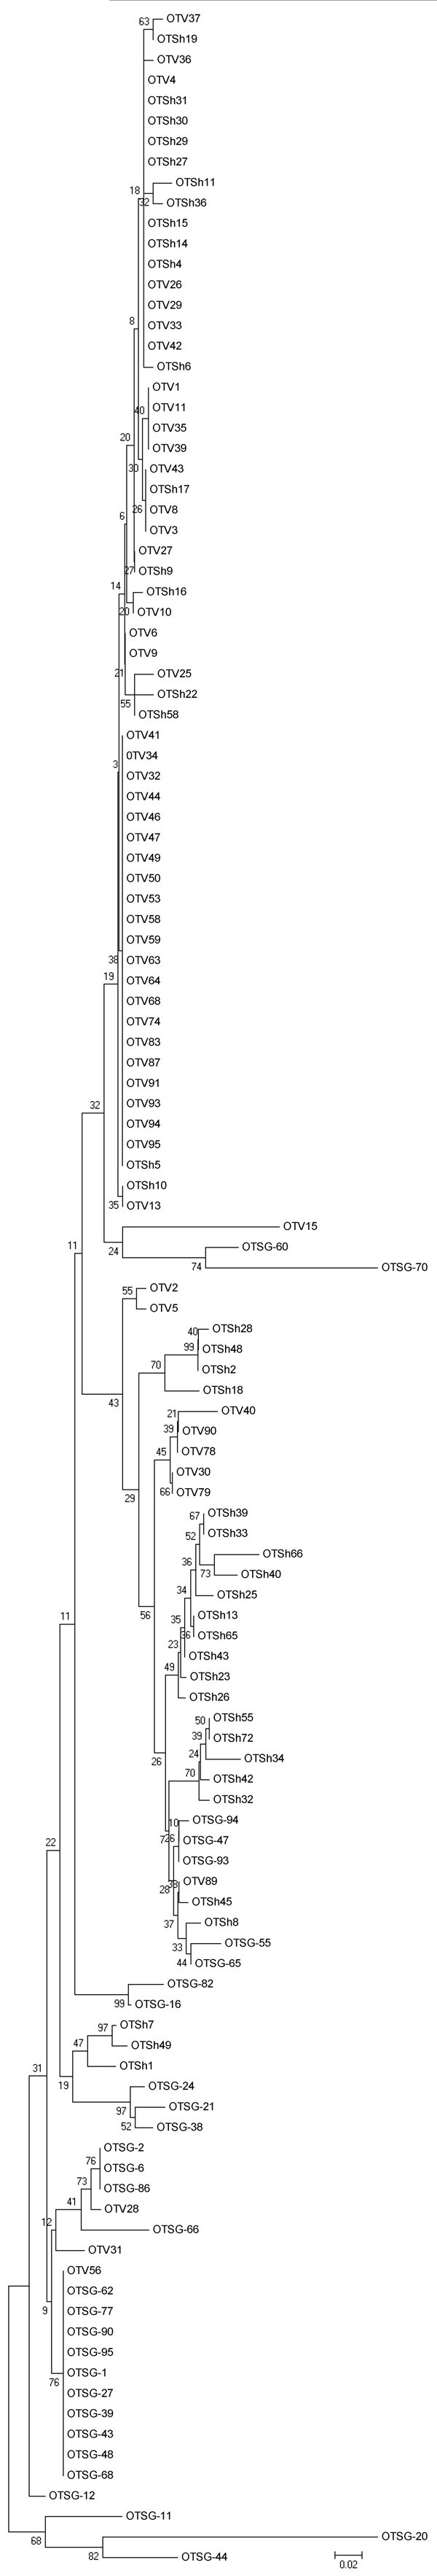 Phylogenetic distribution of representative Orientia tsutsugamushiisolates from scrub typus patients in India, September 2010–August 2012. Isolates were identified on the basis of the 56-kDa TSA gene. The evolutionary history was inferred by using the neighbor-joining method. The percentage of replicate trees in which the associated taxa clustered together in the bootstrap test (1,000 replicates) is shown next to the branches. The tree is drawn to scale, with branch lengths in the same units as 